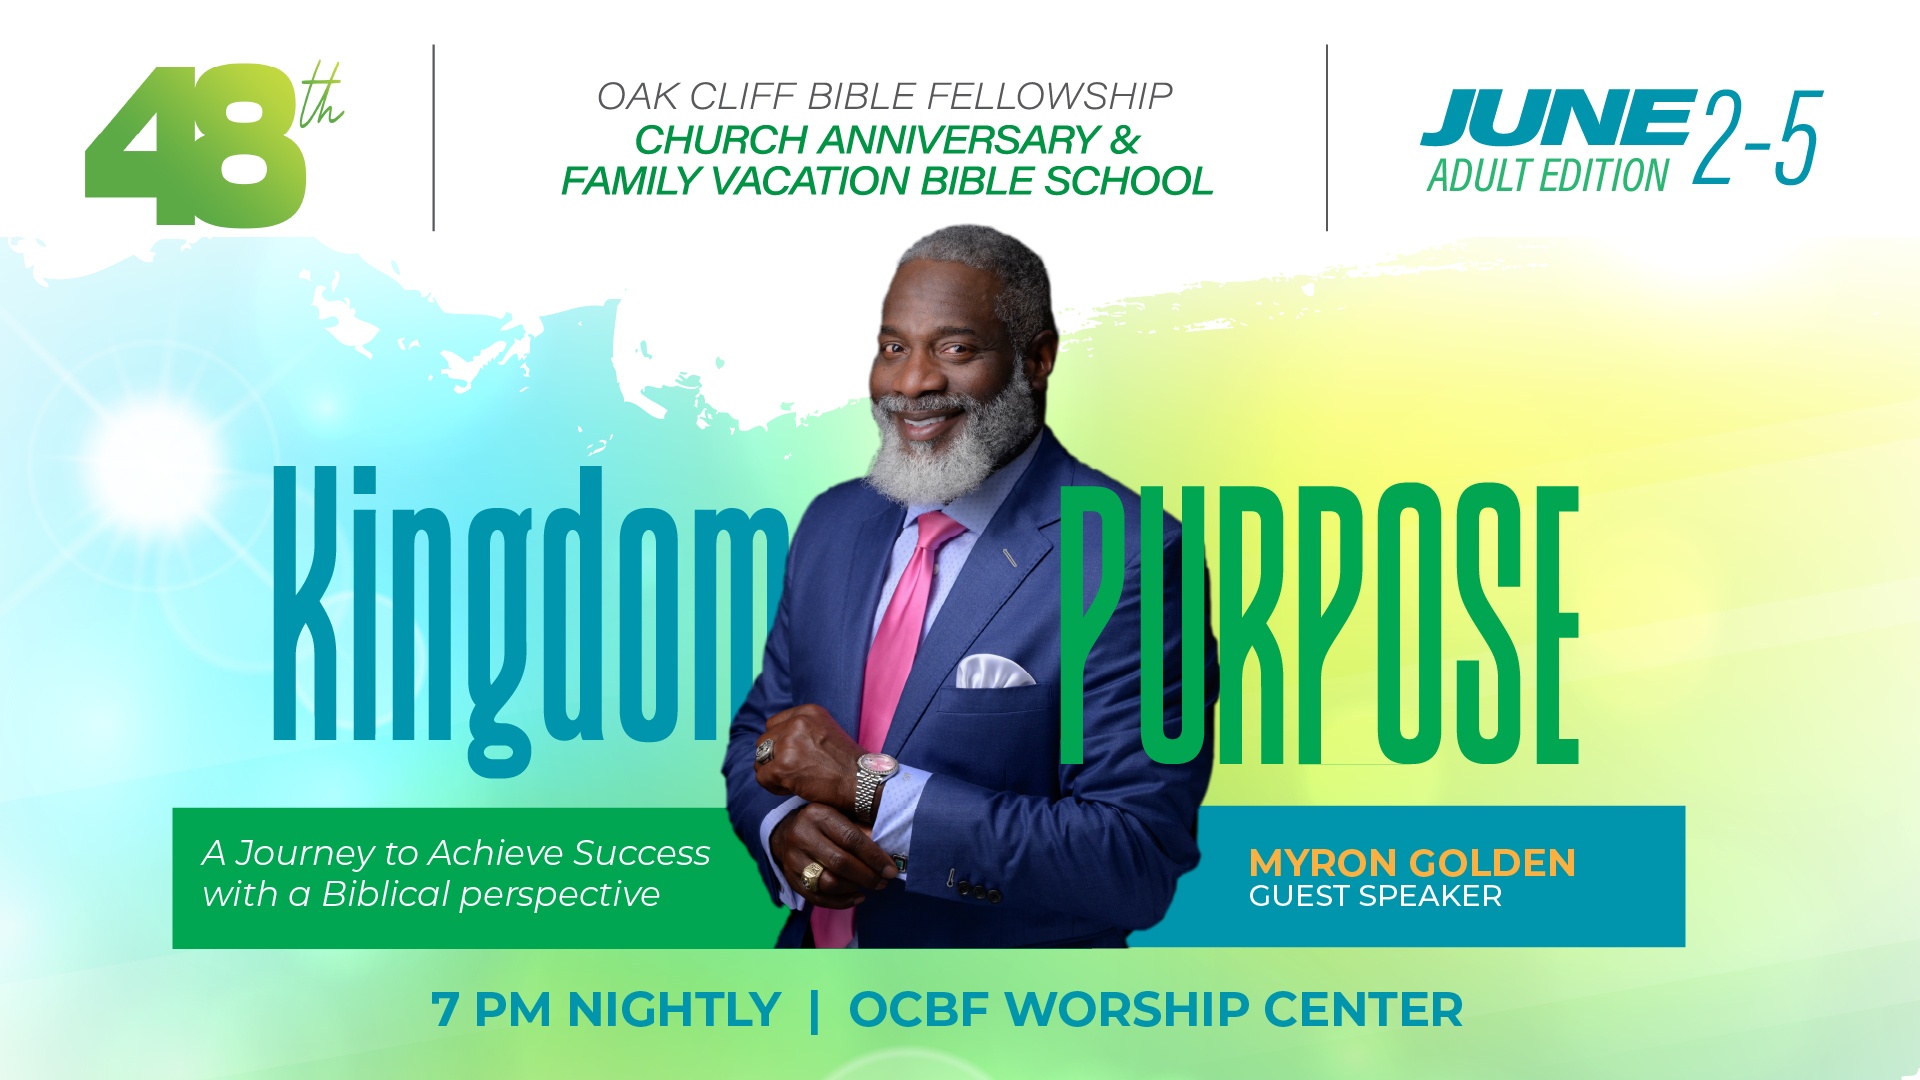 Family vacation Bible school (VBS) with Myron Golden